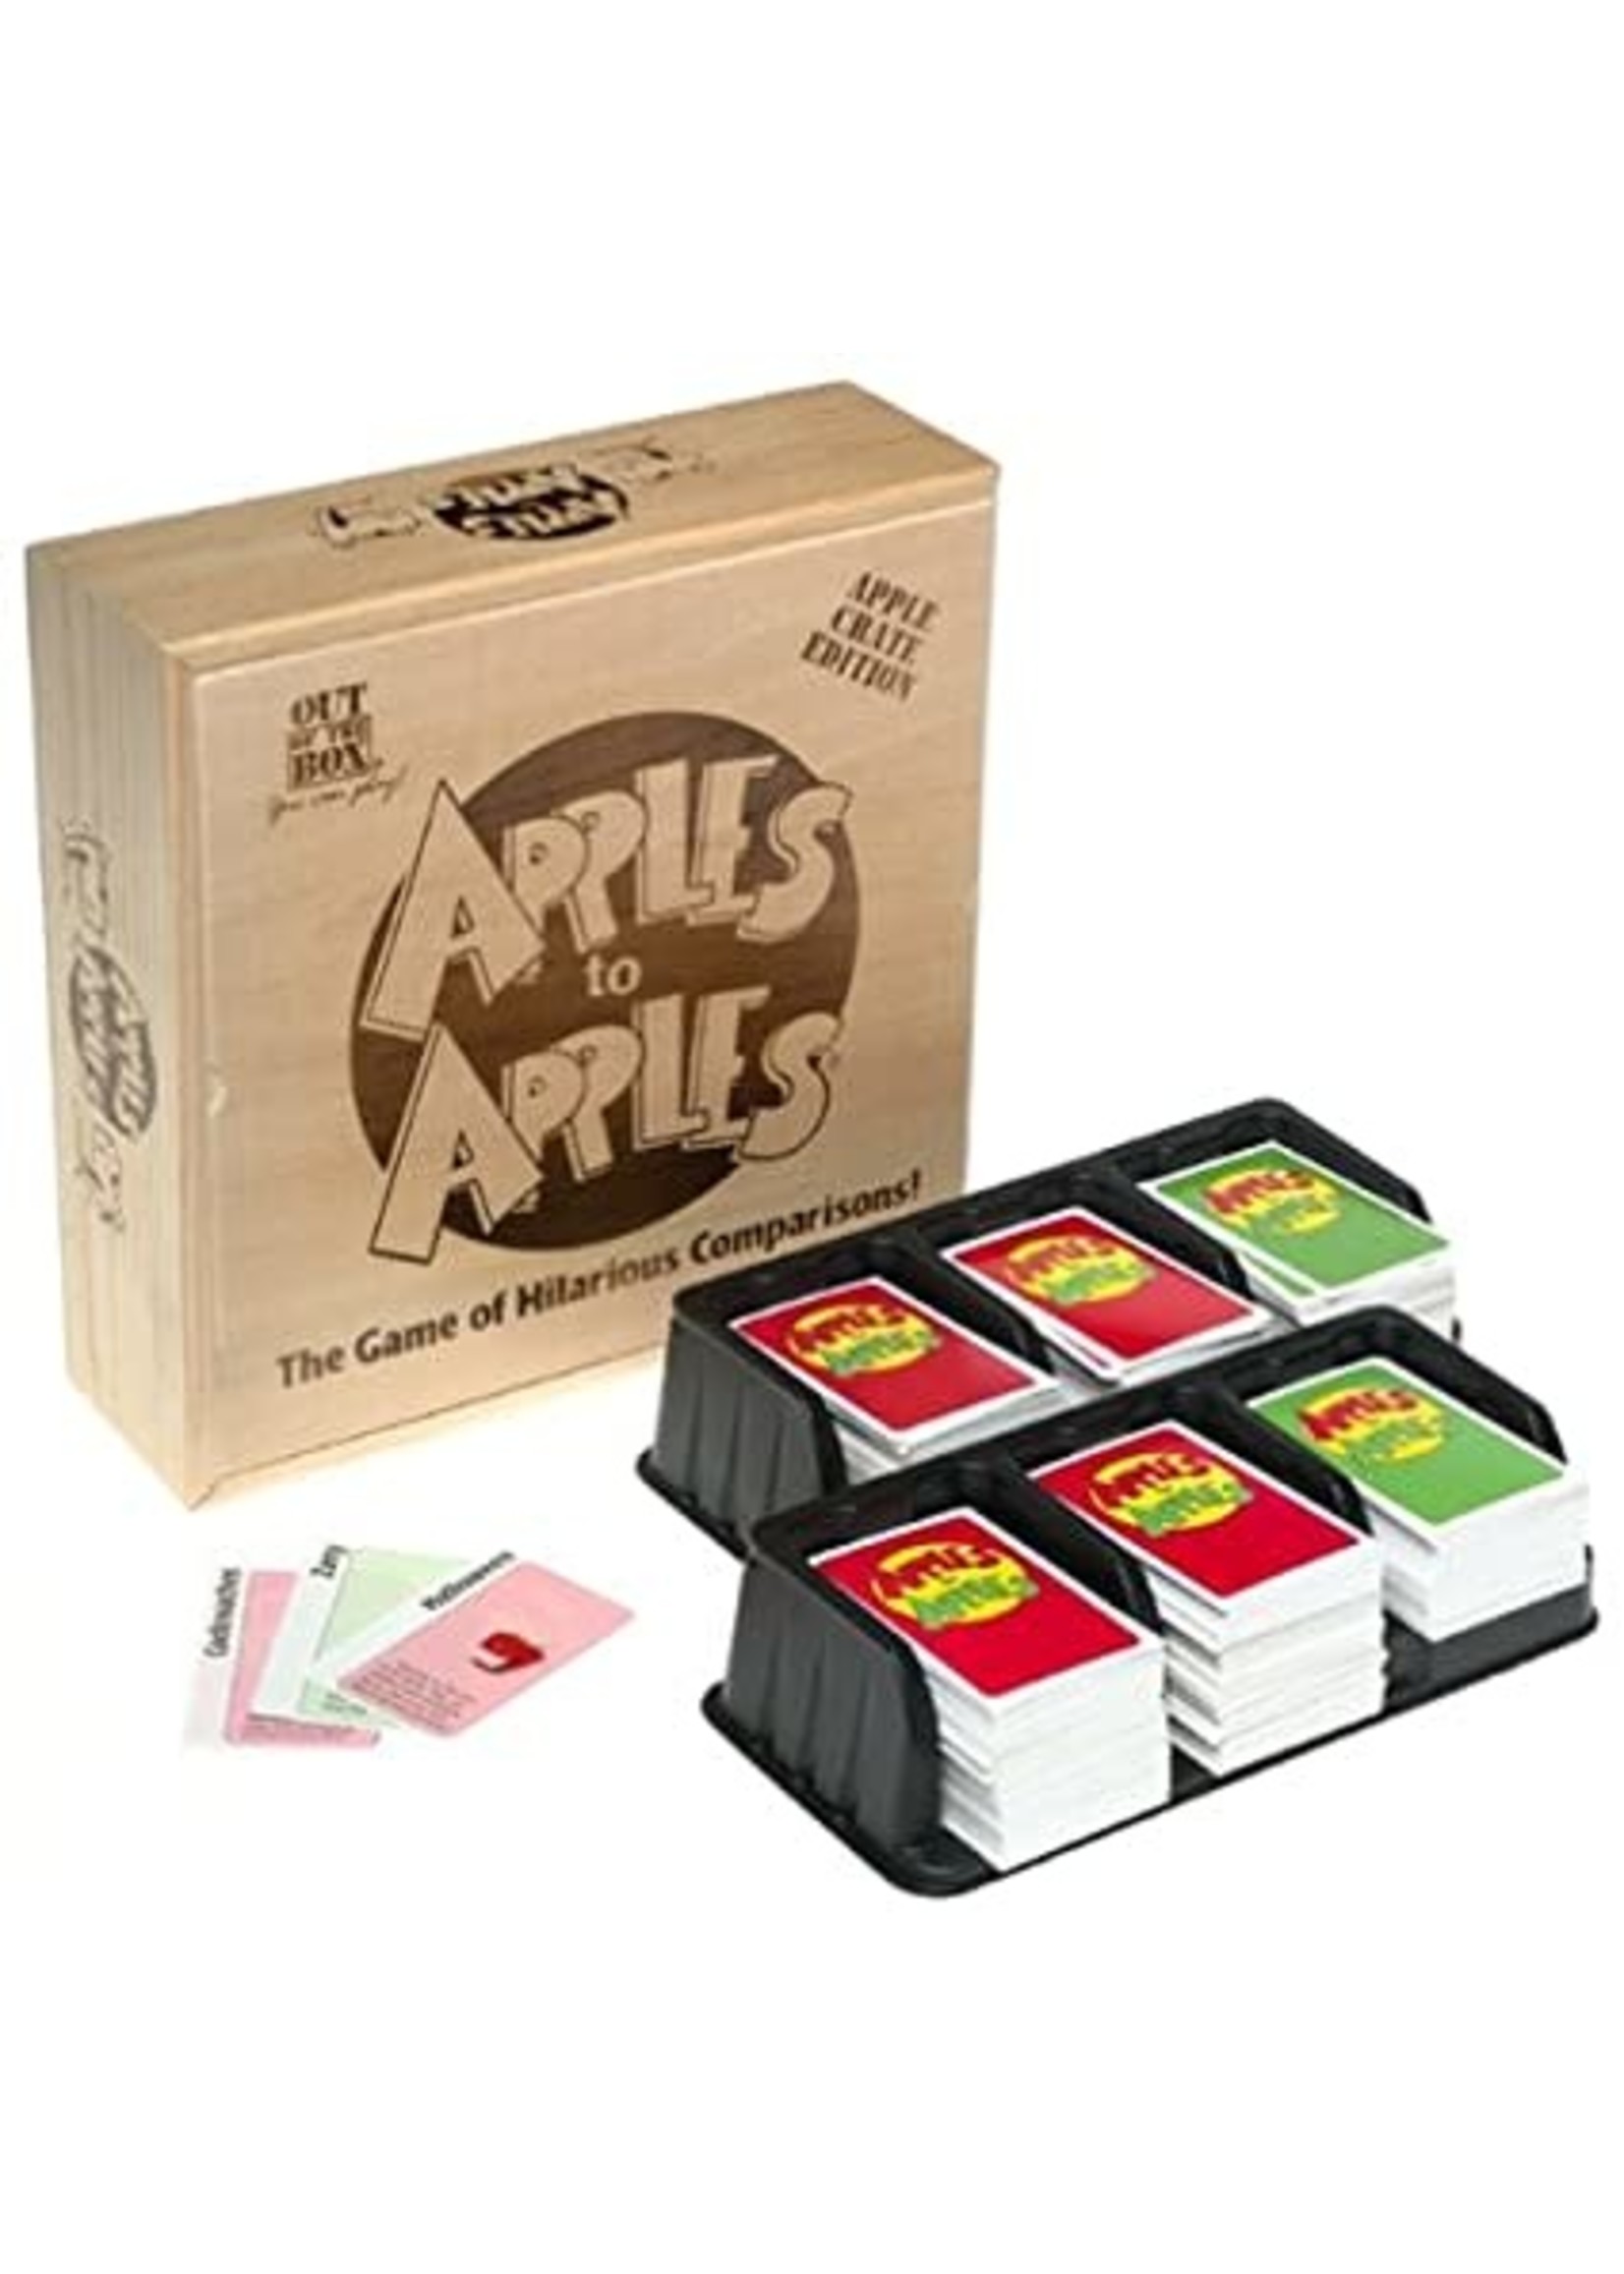 Rental RENTAL - Apples to Apples Crate Edition 5.6 lb